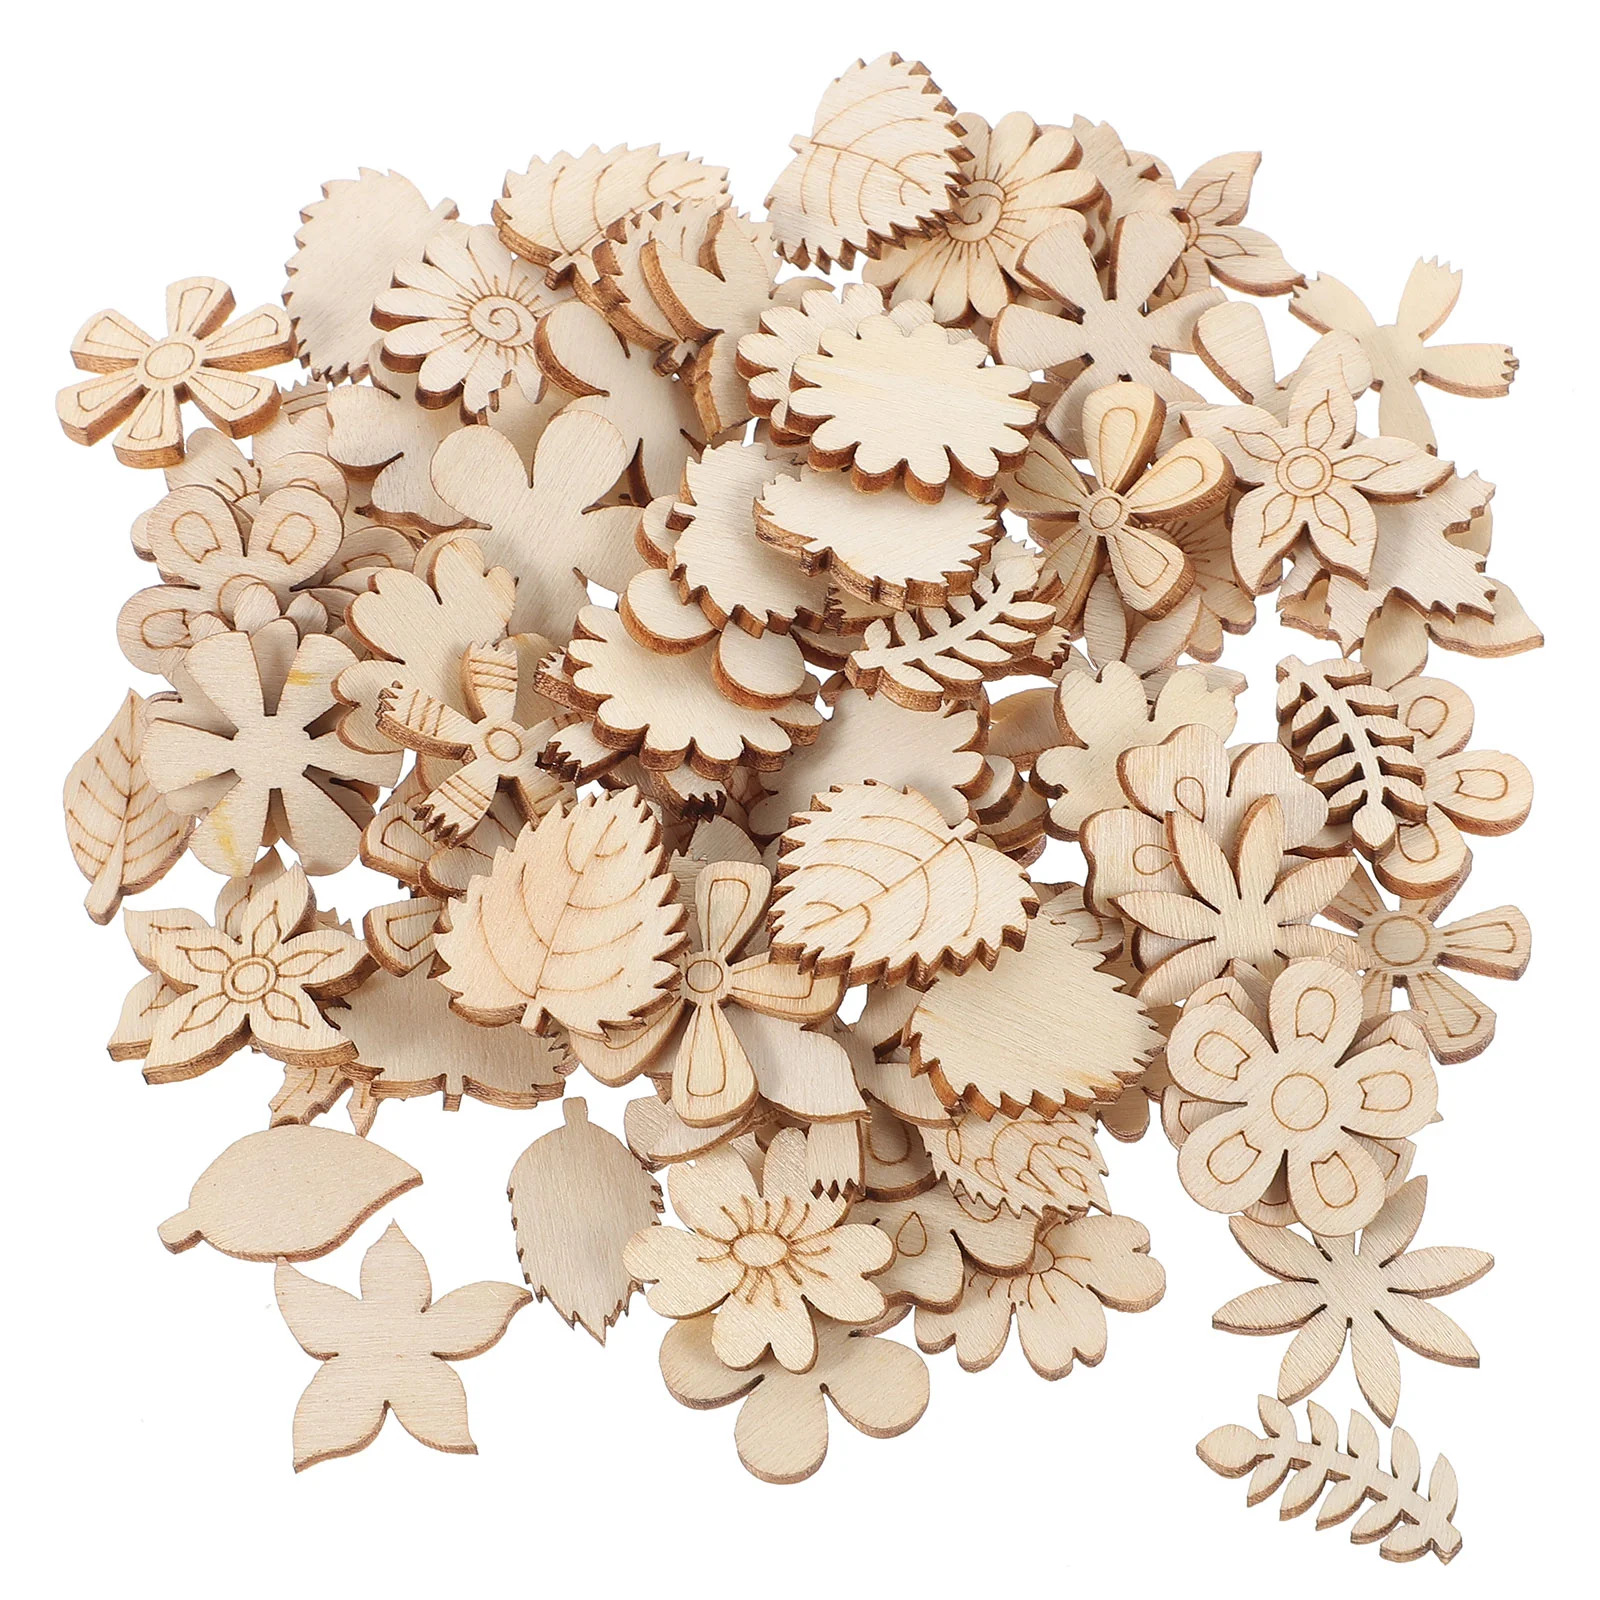 

200 Pcs DIY Graffiti Wood Chips Unfinished Cutout Wooden Shapes Flowers Slices Leaf Cutouts Leaves Carving